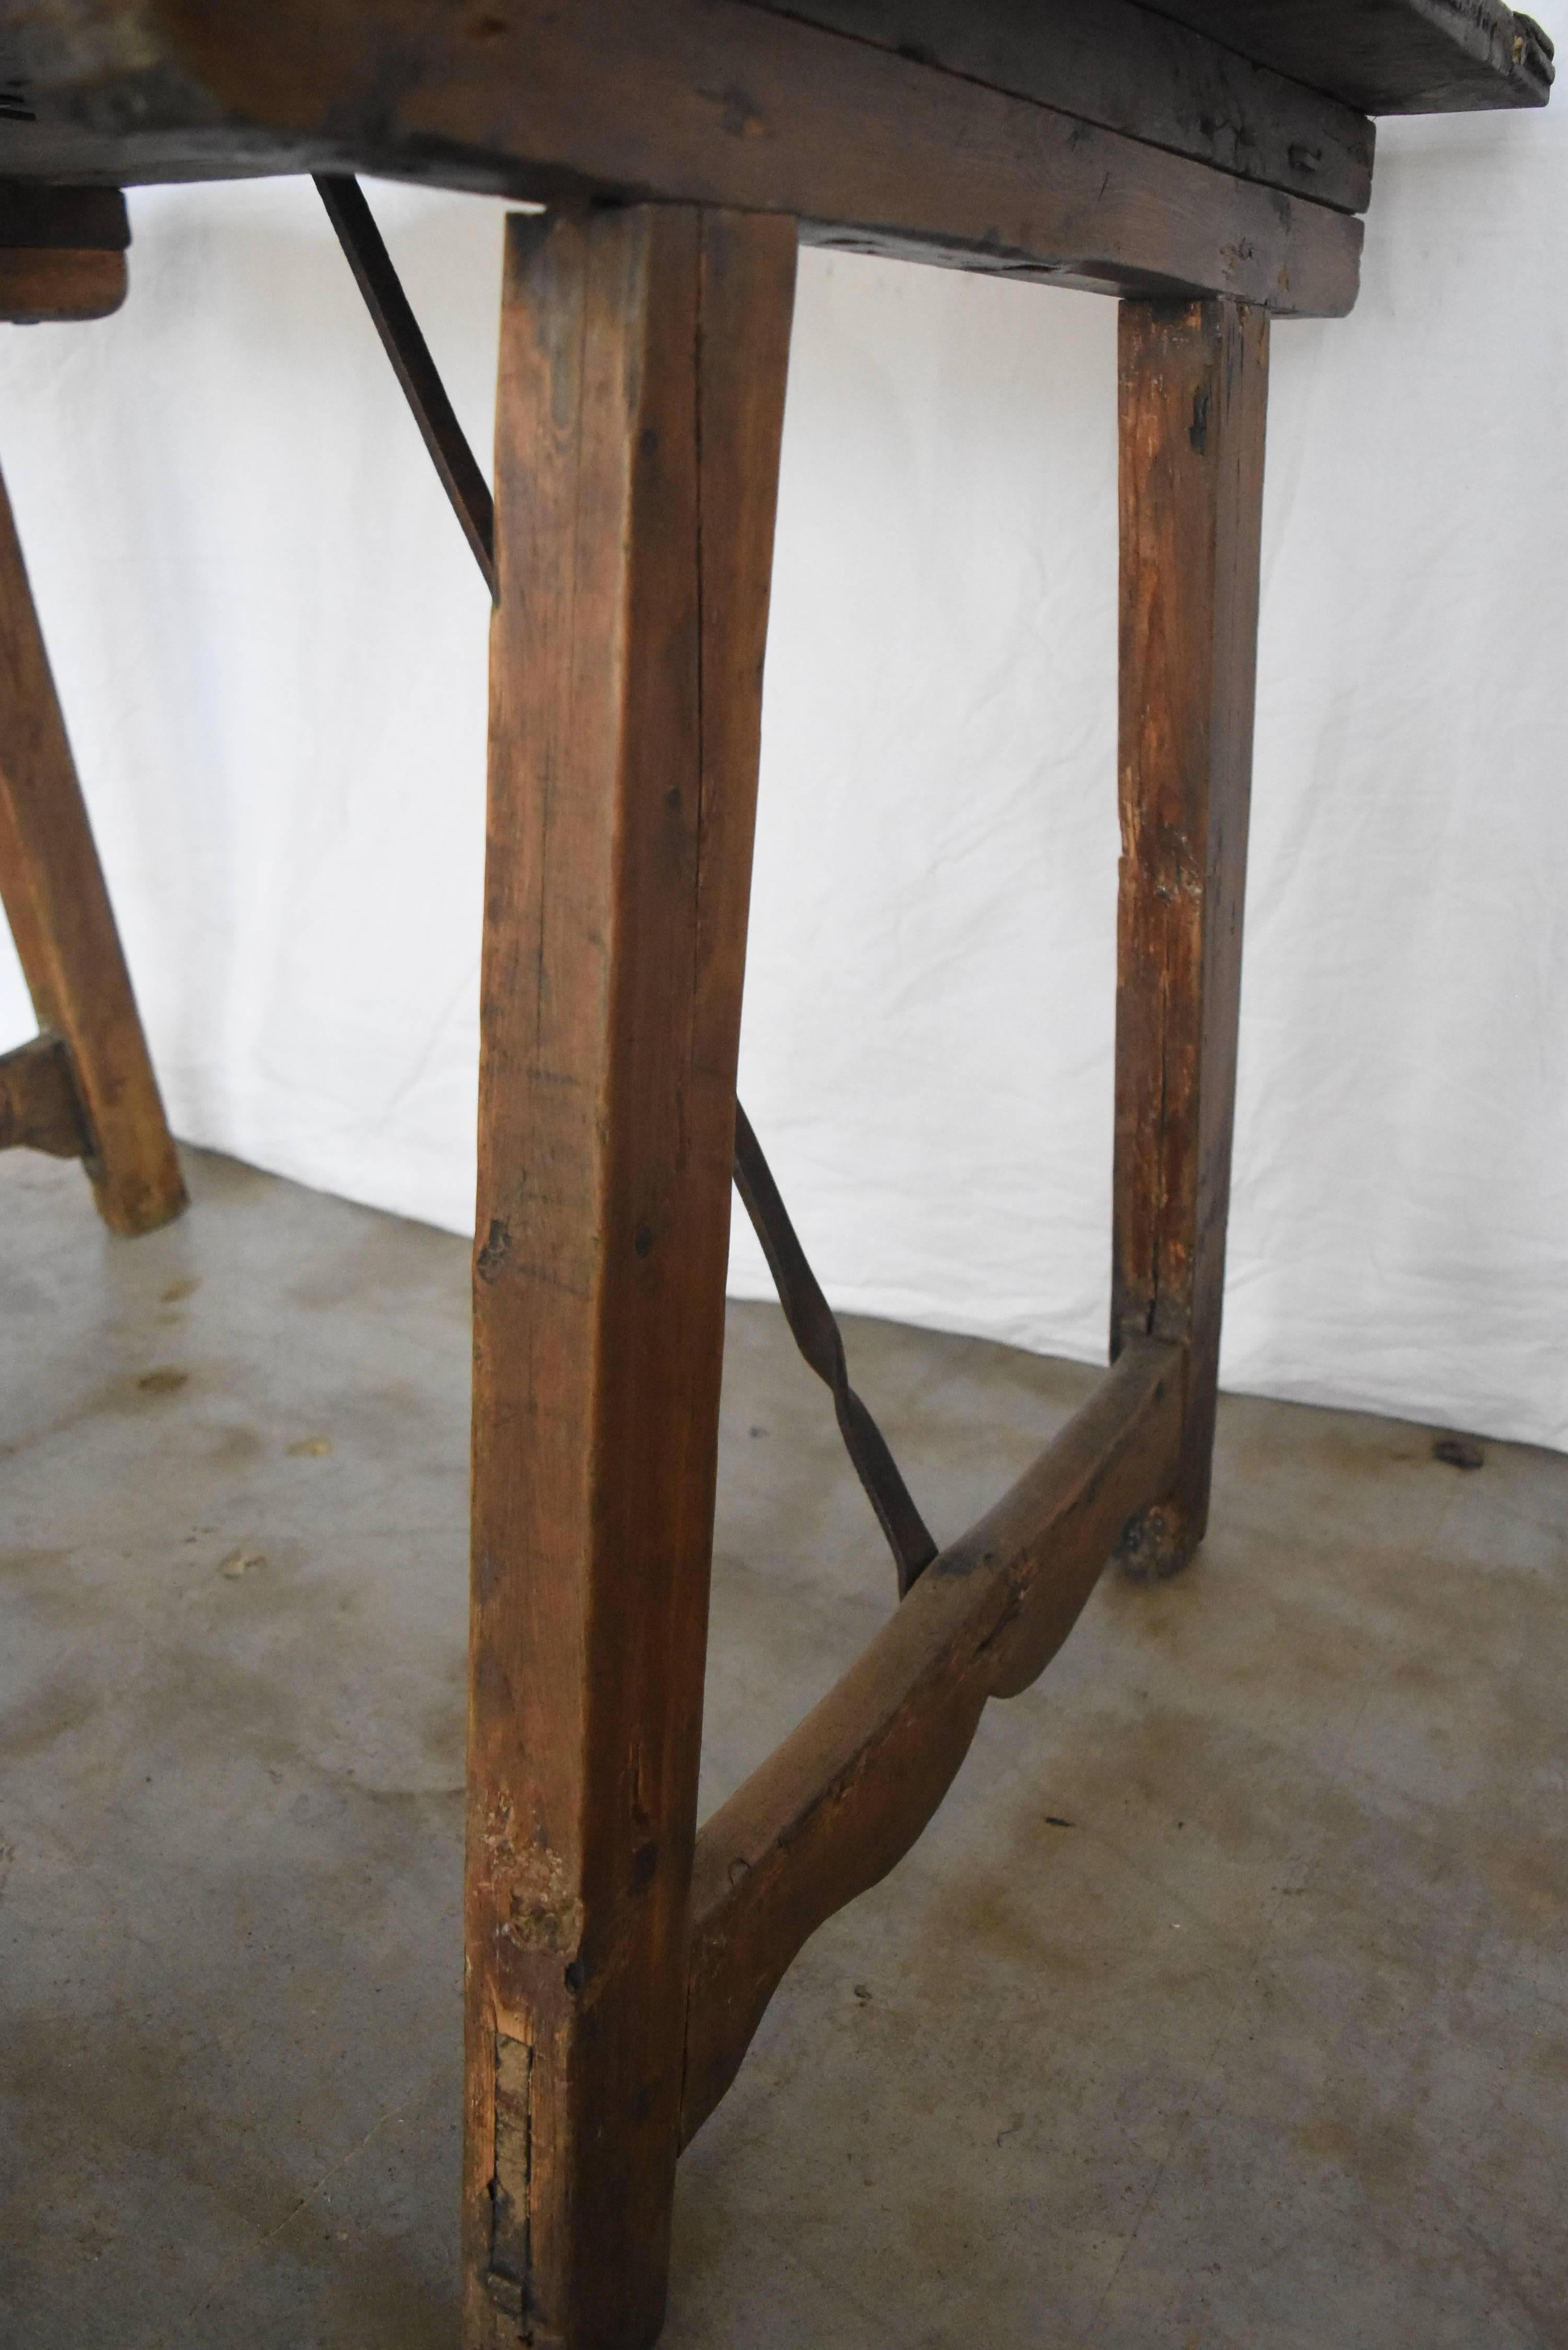 This is a rustic, early table from Spain. It has both walnut top, chestnut legs, beautiful scalloped legs on the bottom and iron stretcher; which has been changed at some point. I took photos of it underneath so you could see the bottom of the top